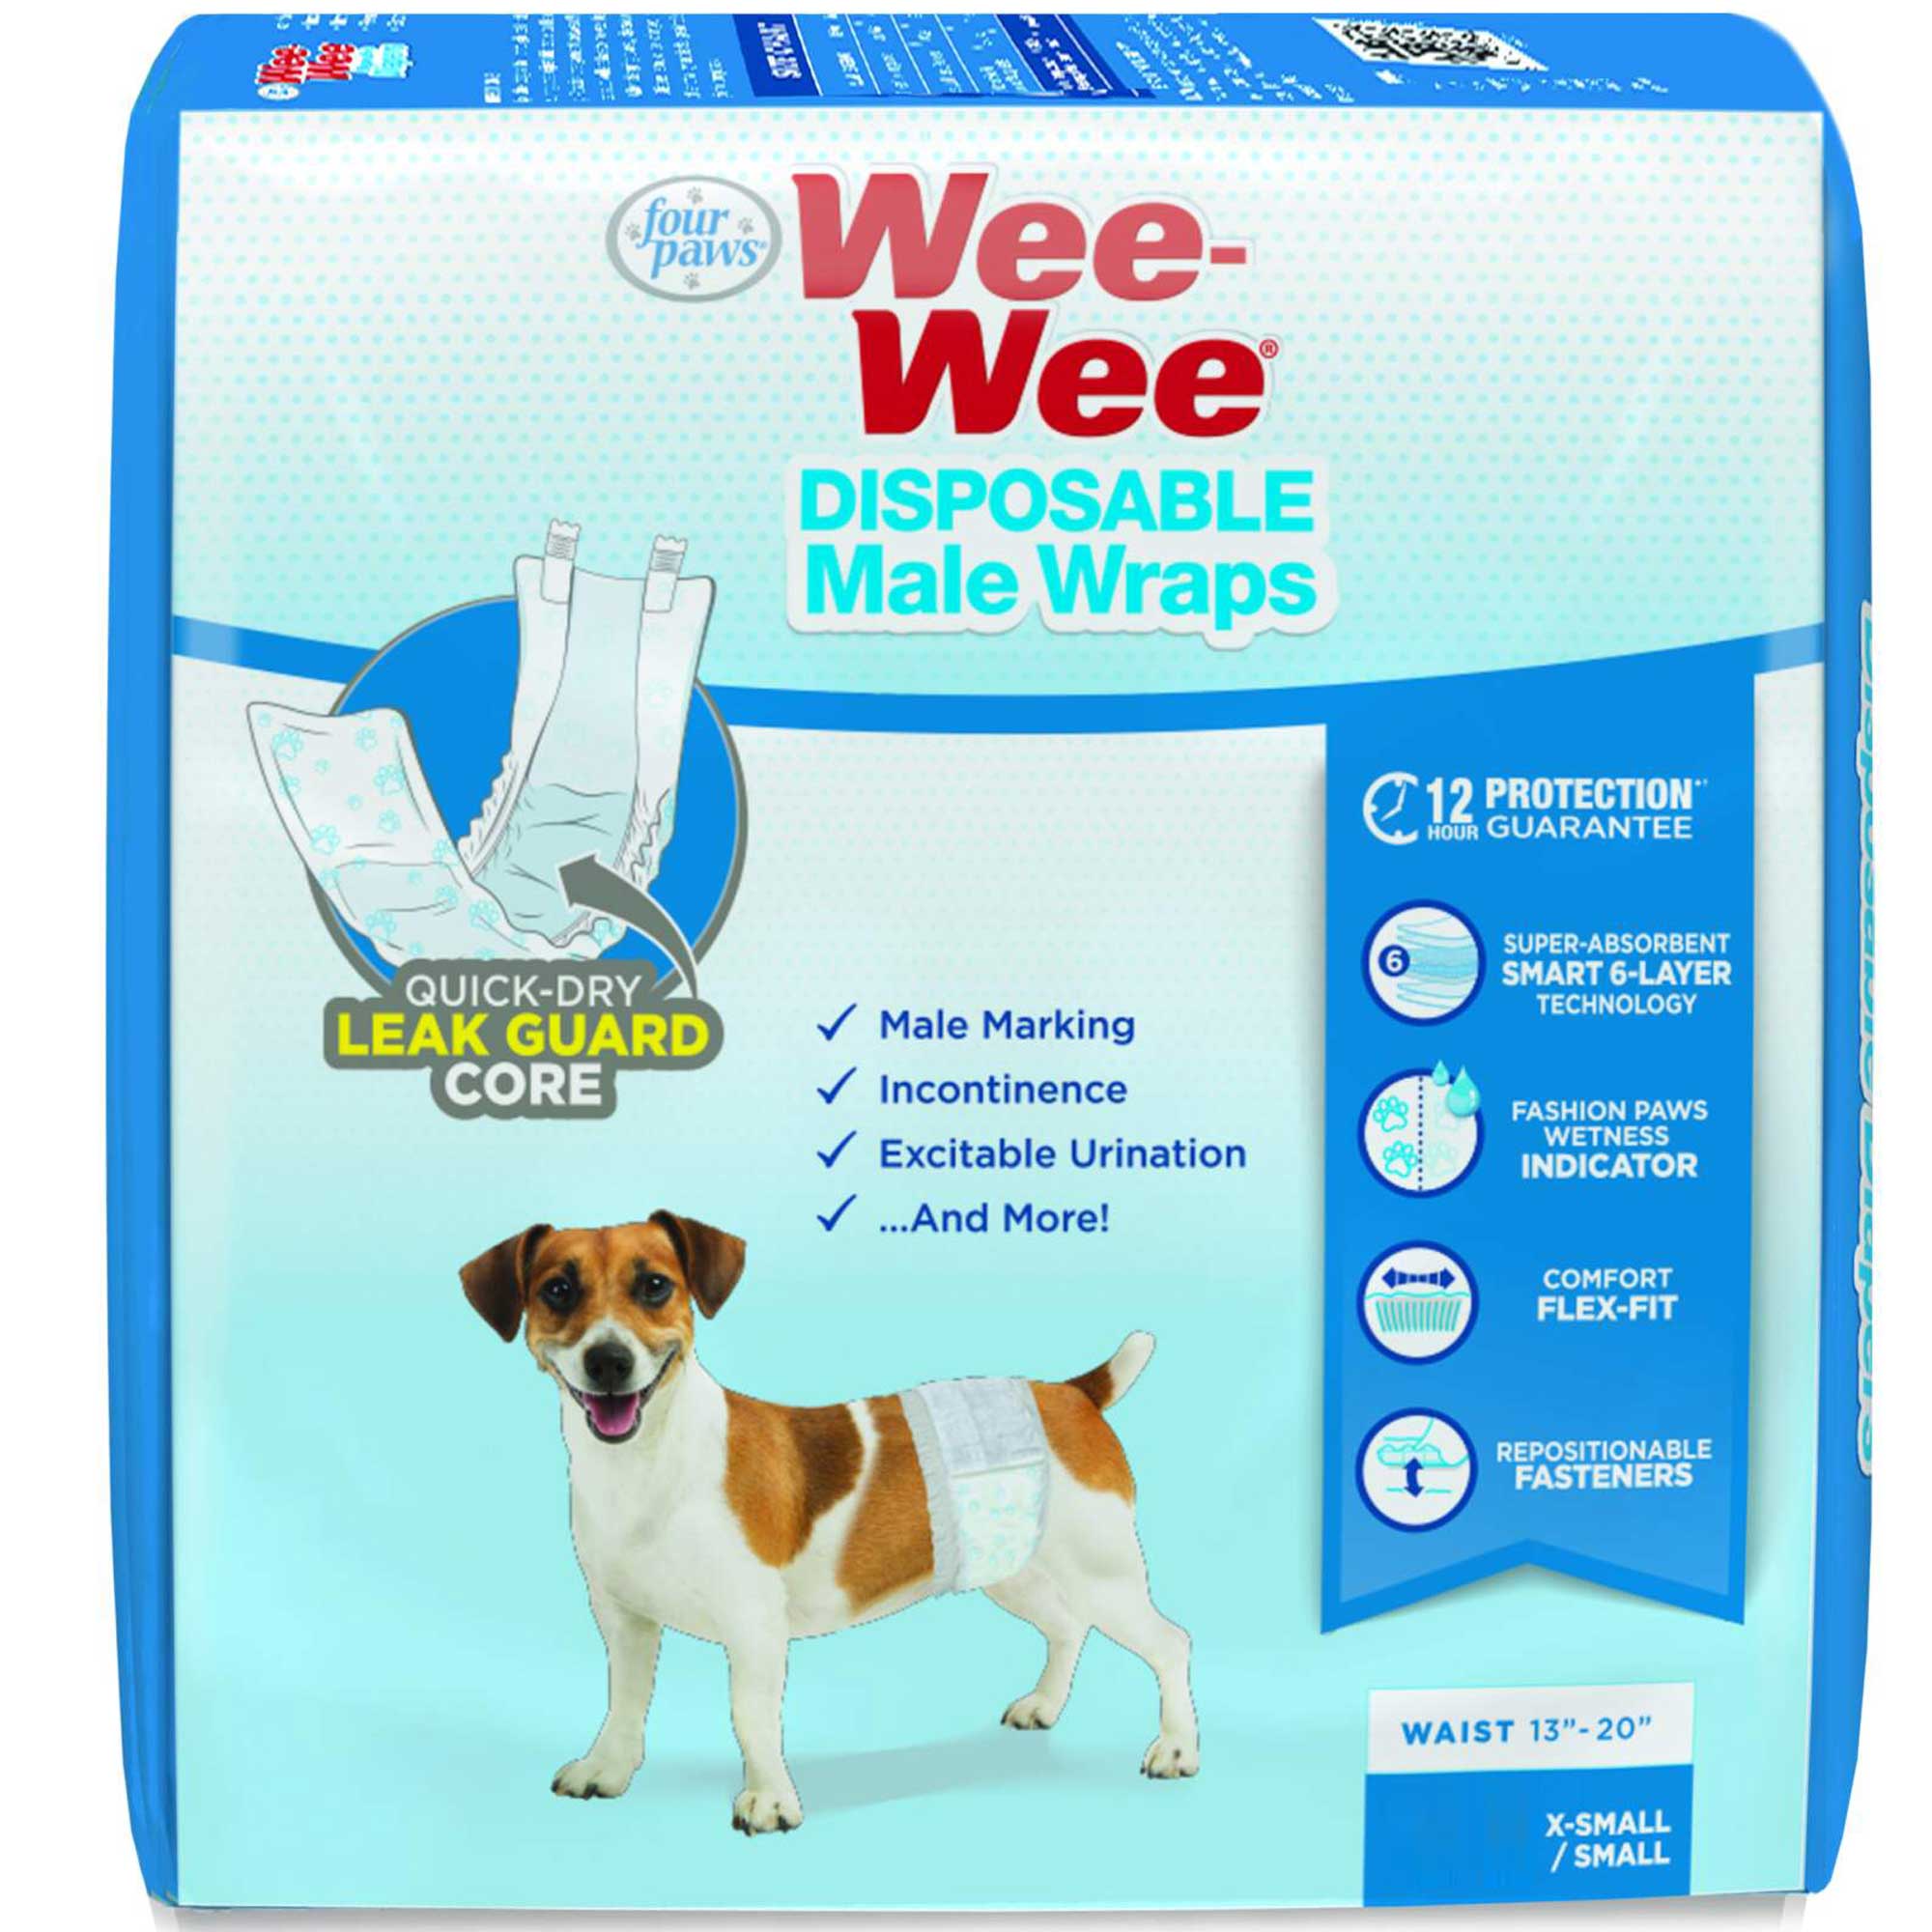 Wee-Wee Disposable Male Wraps Usage